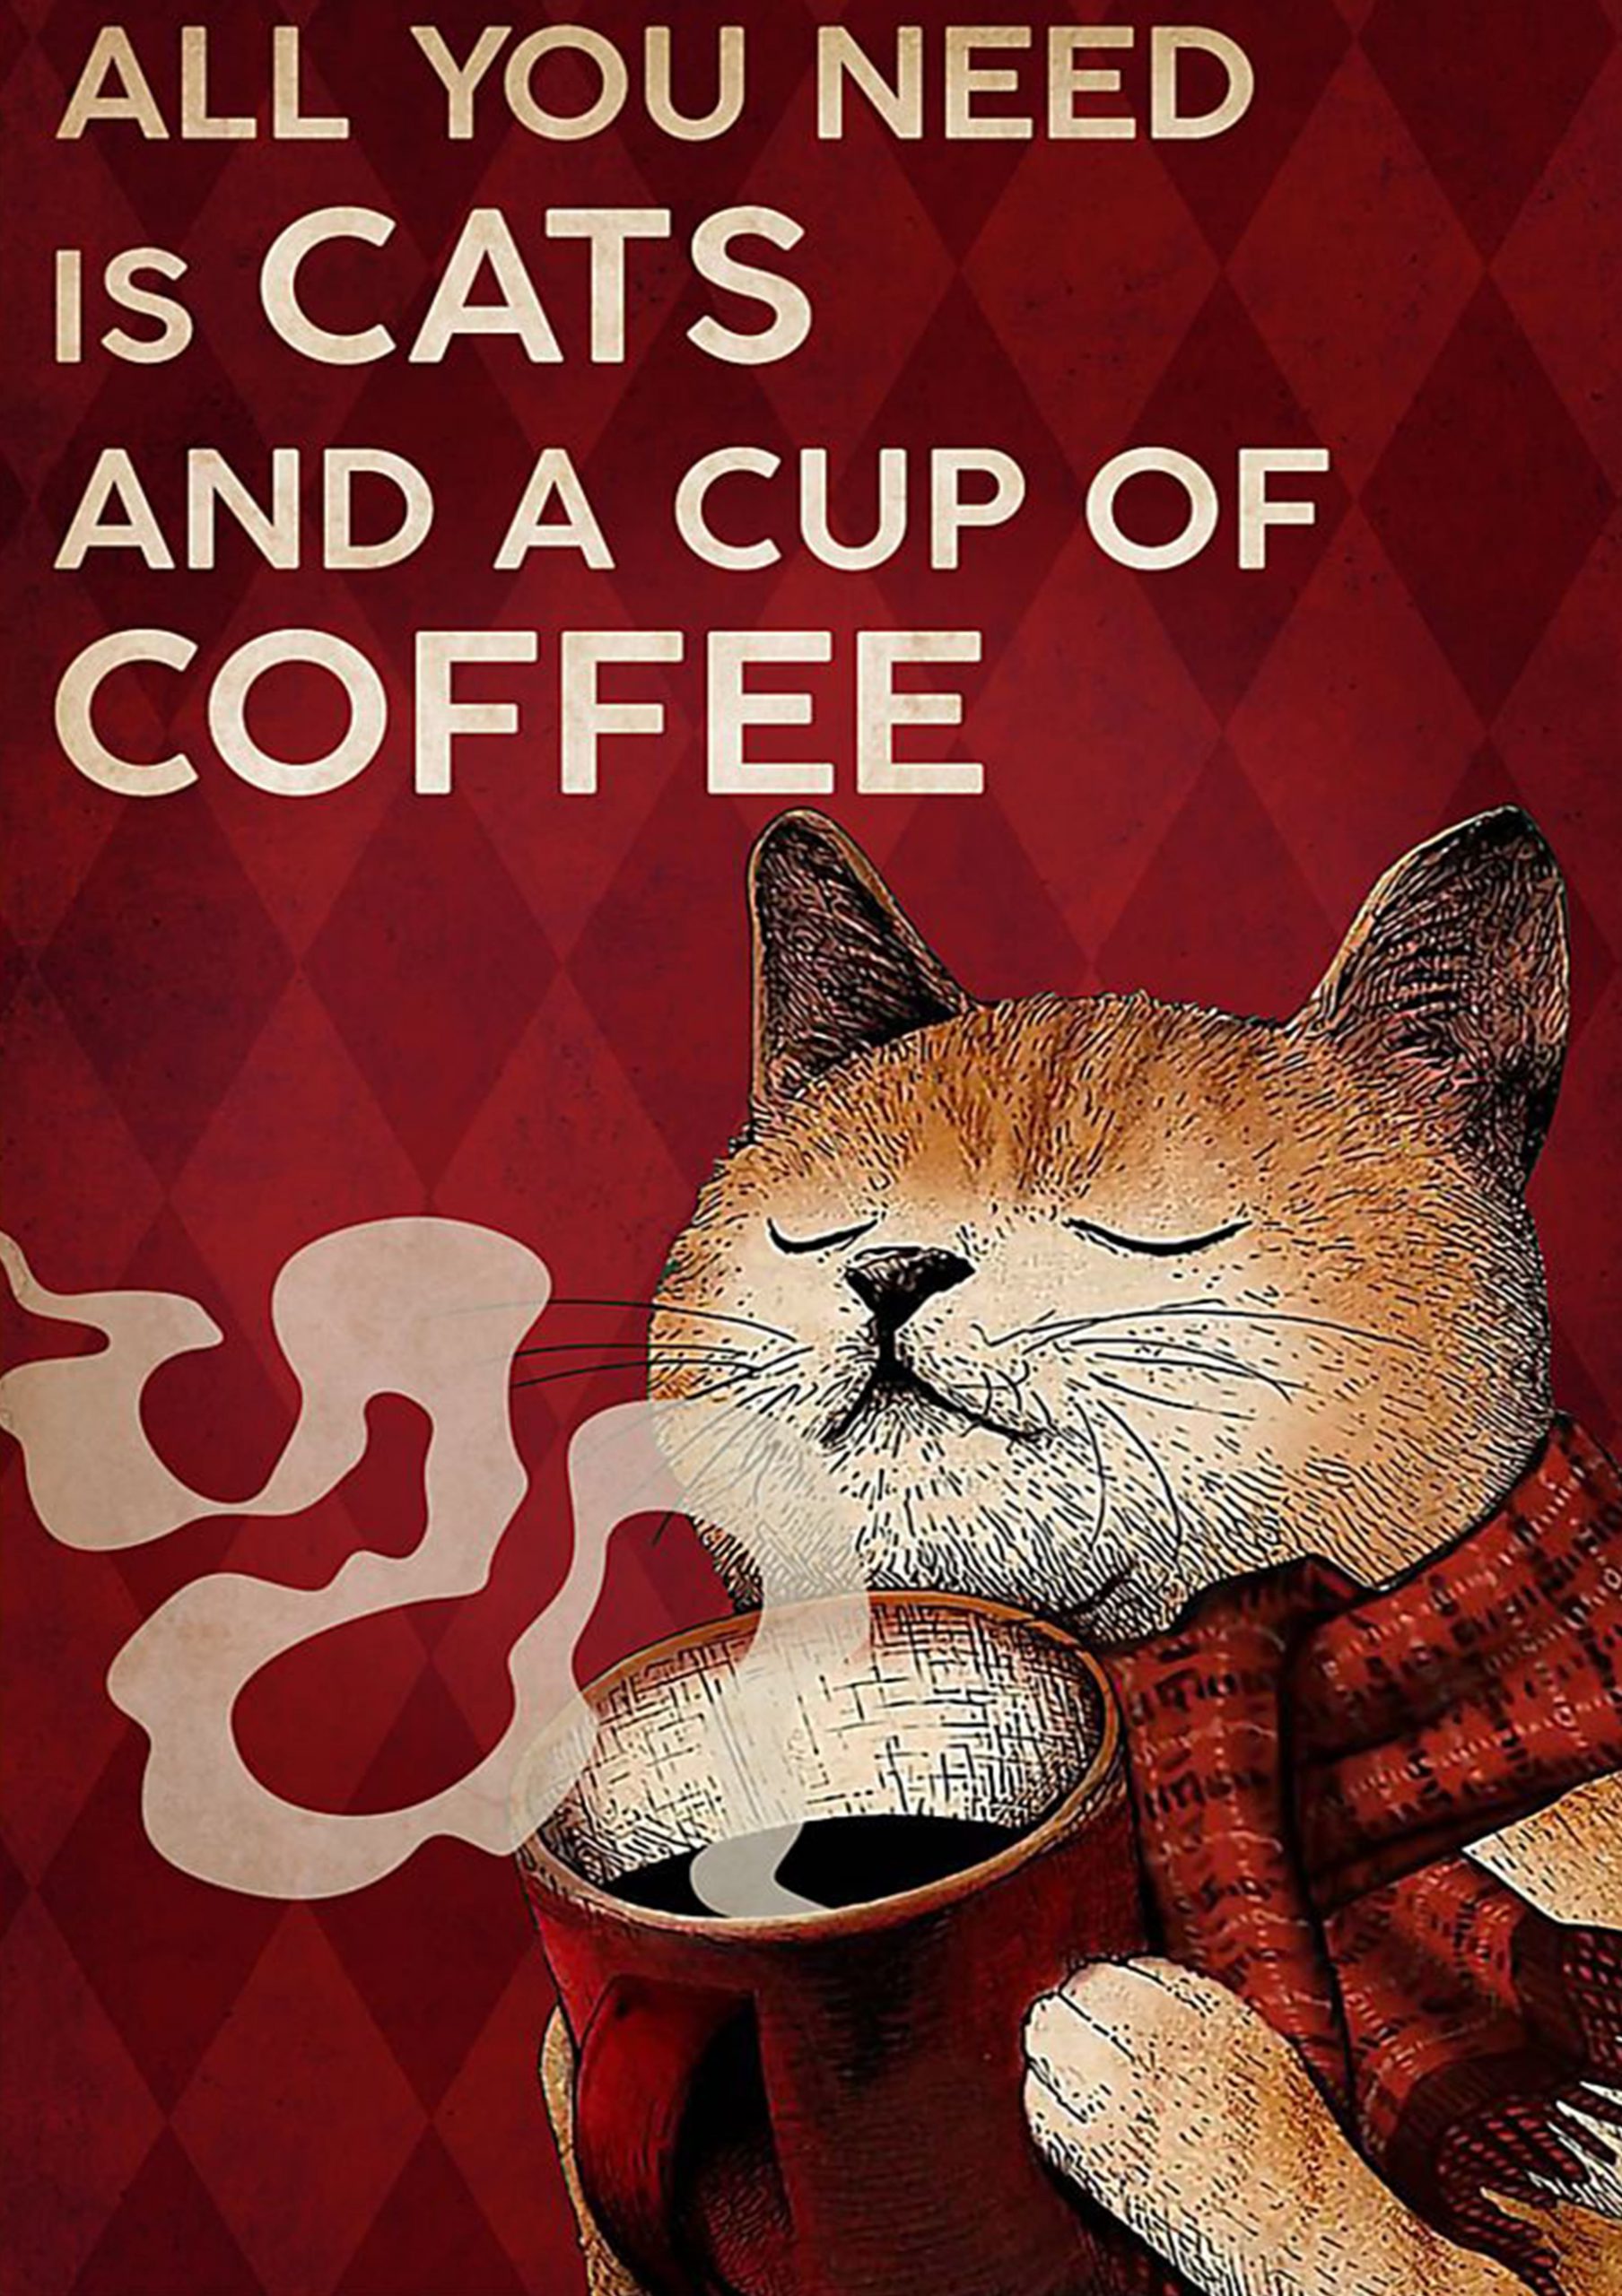 vintage all you need is cats and a cup of coffee poster 1 - Copy